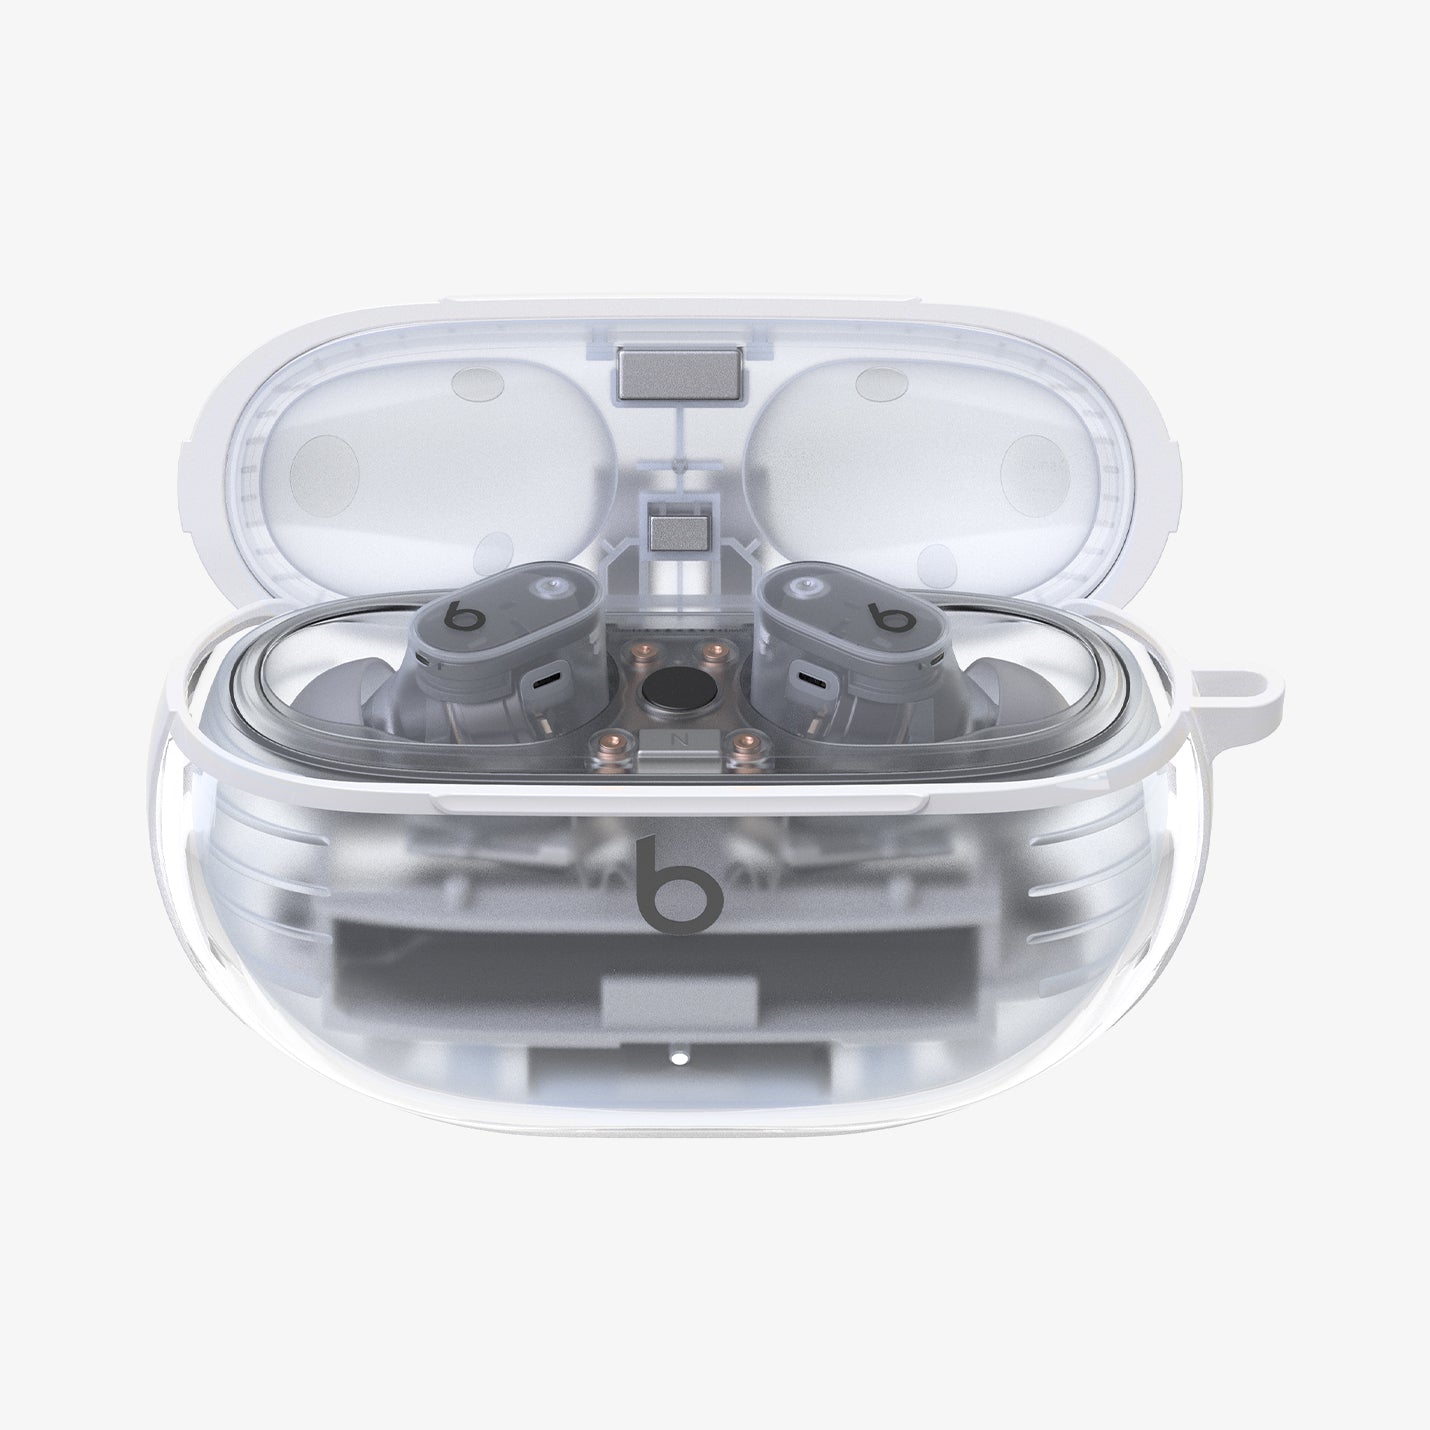 ACS06935 - Beats Studio Buds Case Ultra Hybrid in crystal clear showing the front with top open and earbuds inside